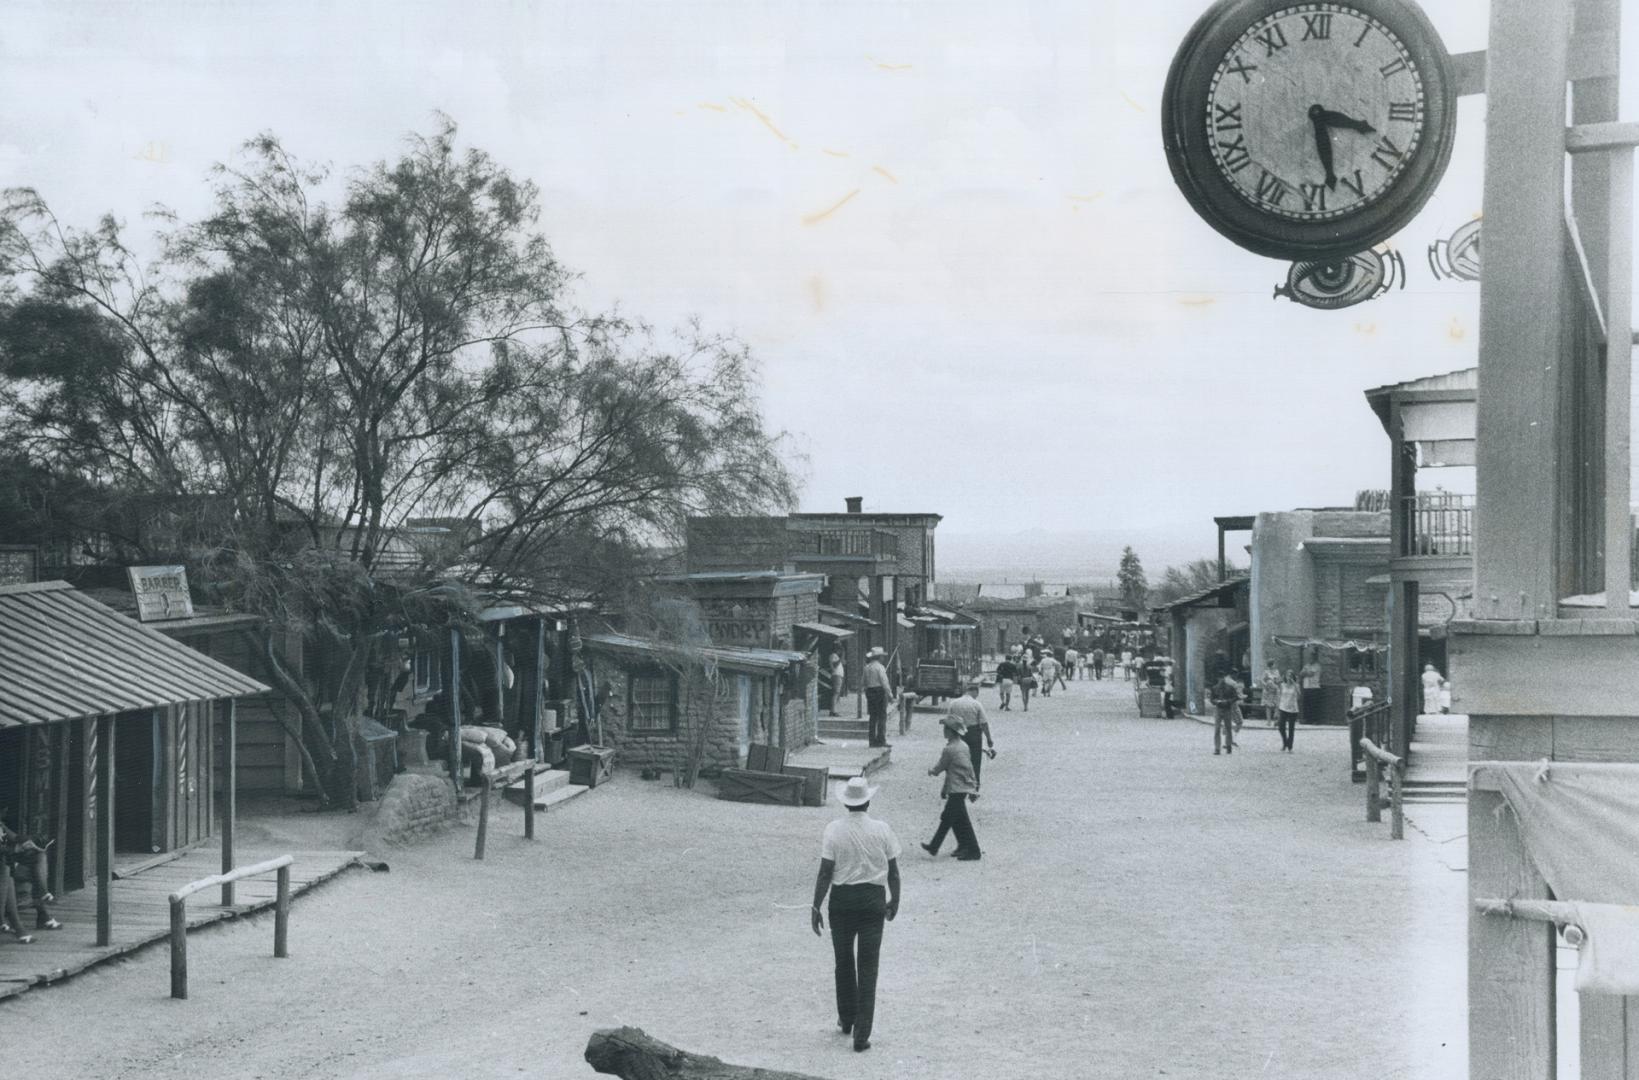 The streets of old Tucson in Arizona looked like this back in the days when cowboys and miners flocked to the area